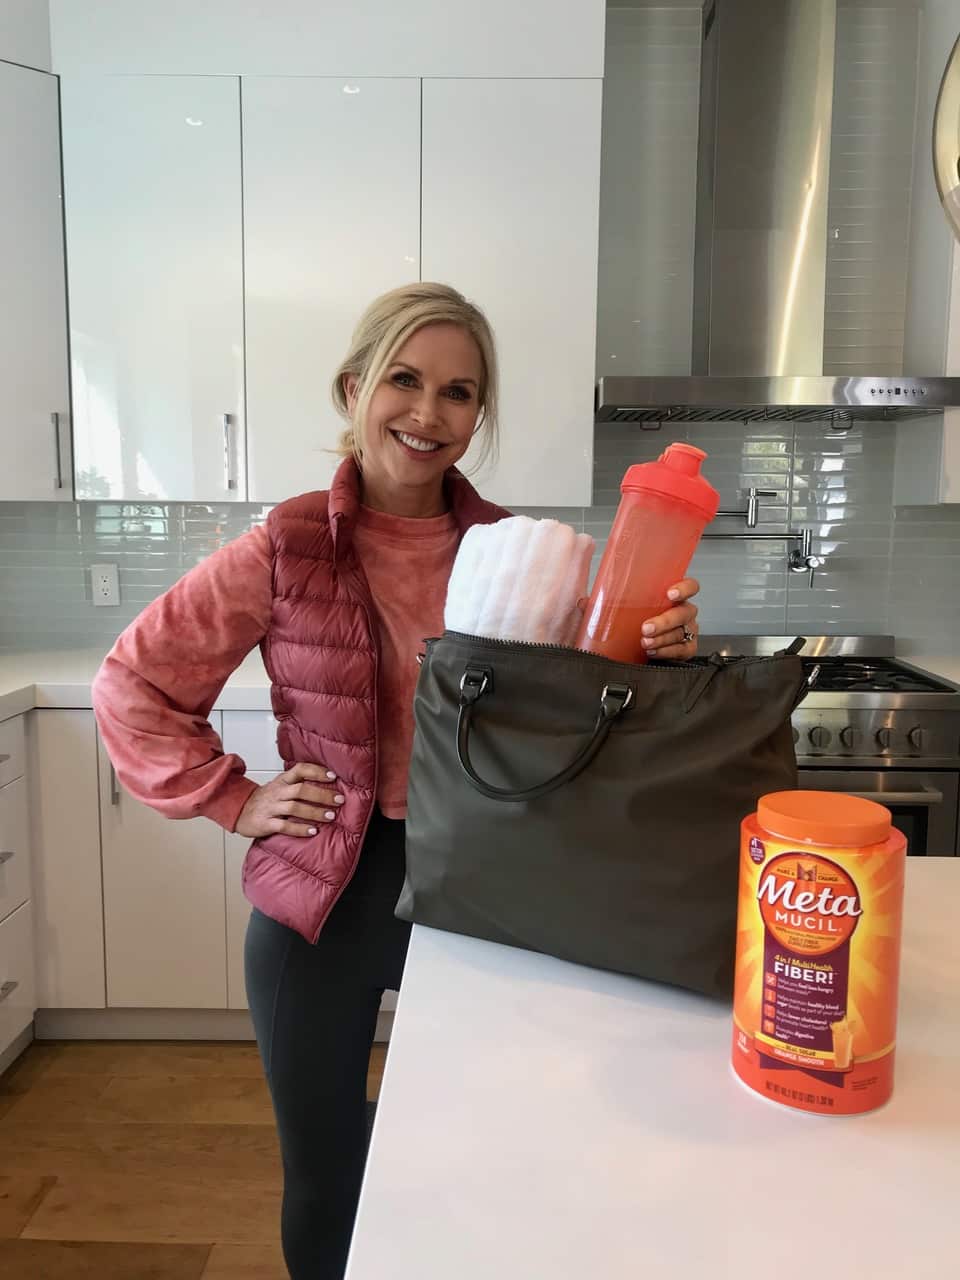 Chris Freytag holding a water bottle in the kitchen with Metamucil fiber on the kitchen counter.